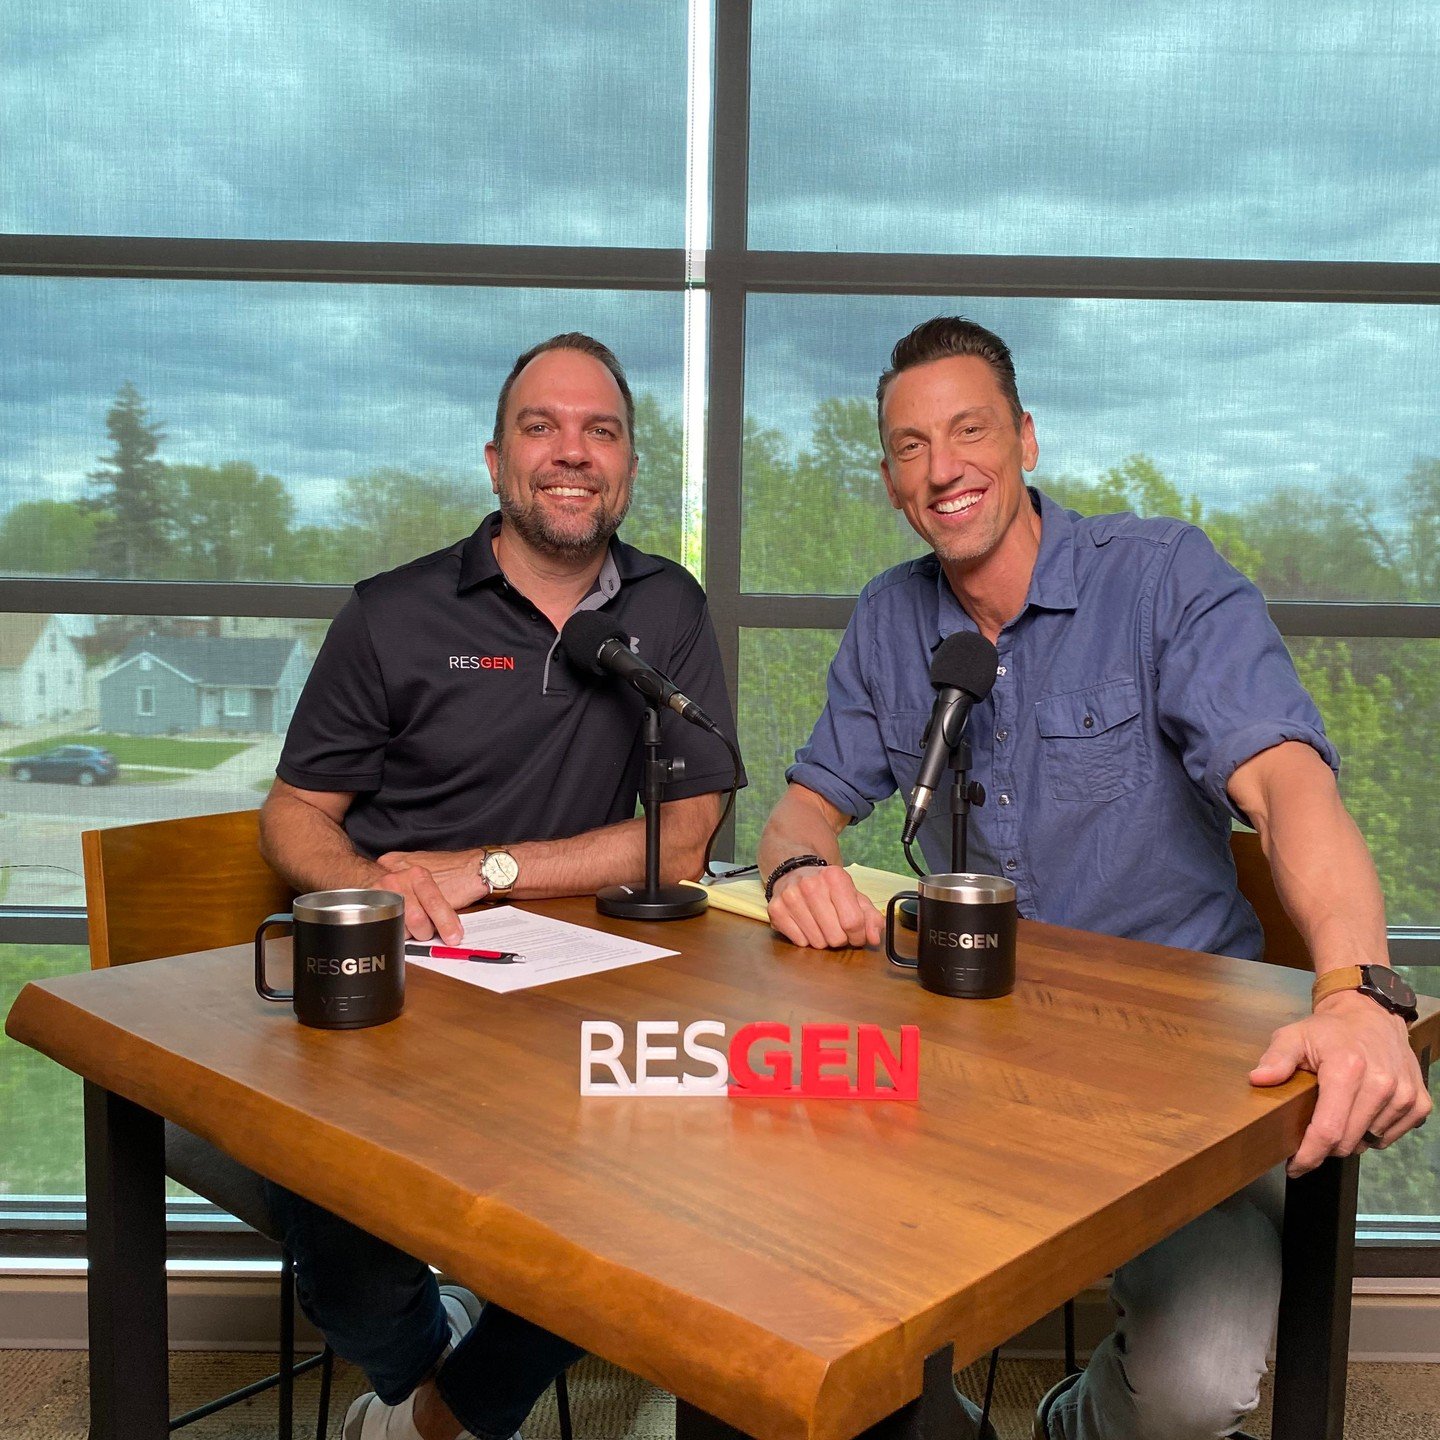 Had the honor of being a guest on the RESGEN Giving Life Podcast with my good friend @resgentom. Huge fan of this ministry, this podcast and their annual men's summit. 

Talking point include:

~Walking into our true identity
~Opening up the door to 